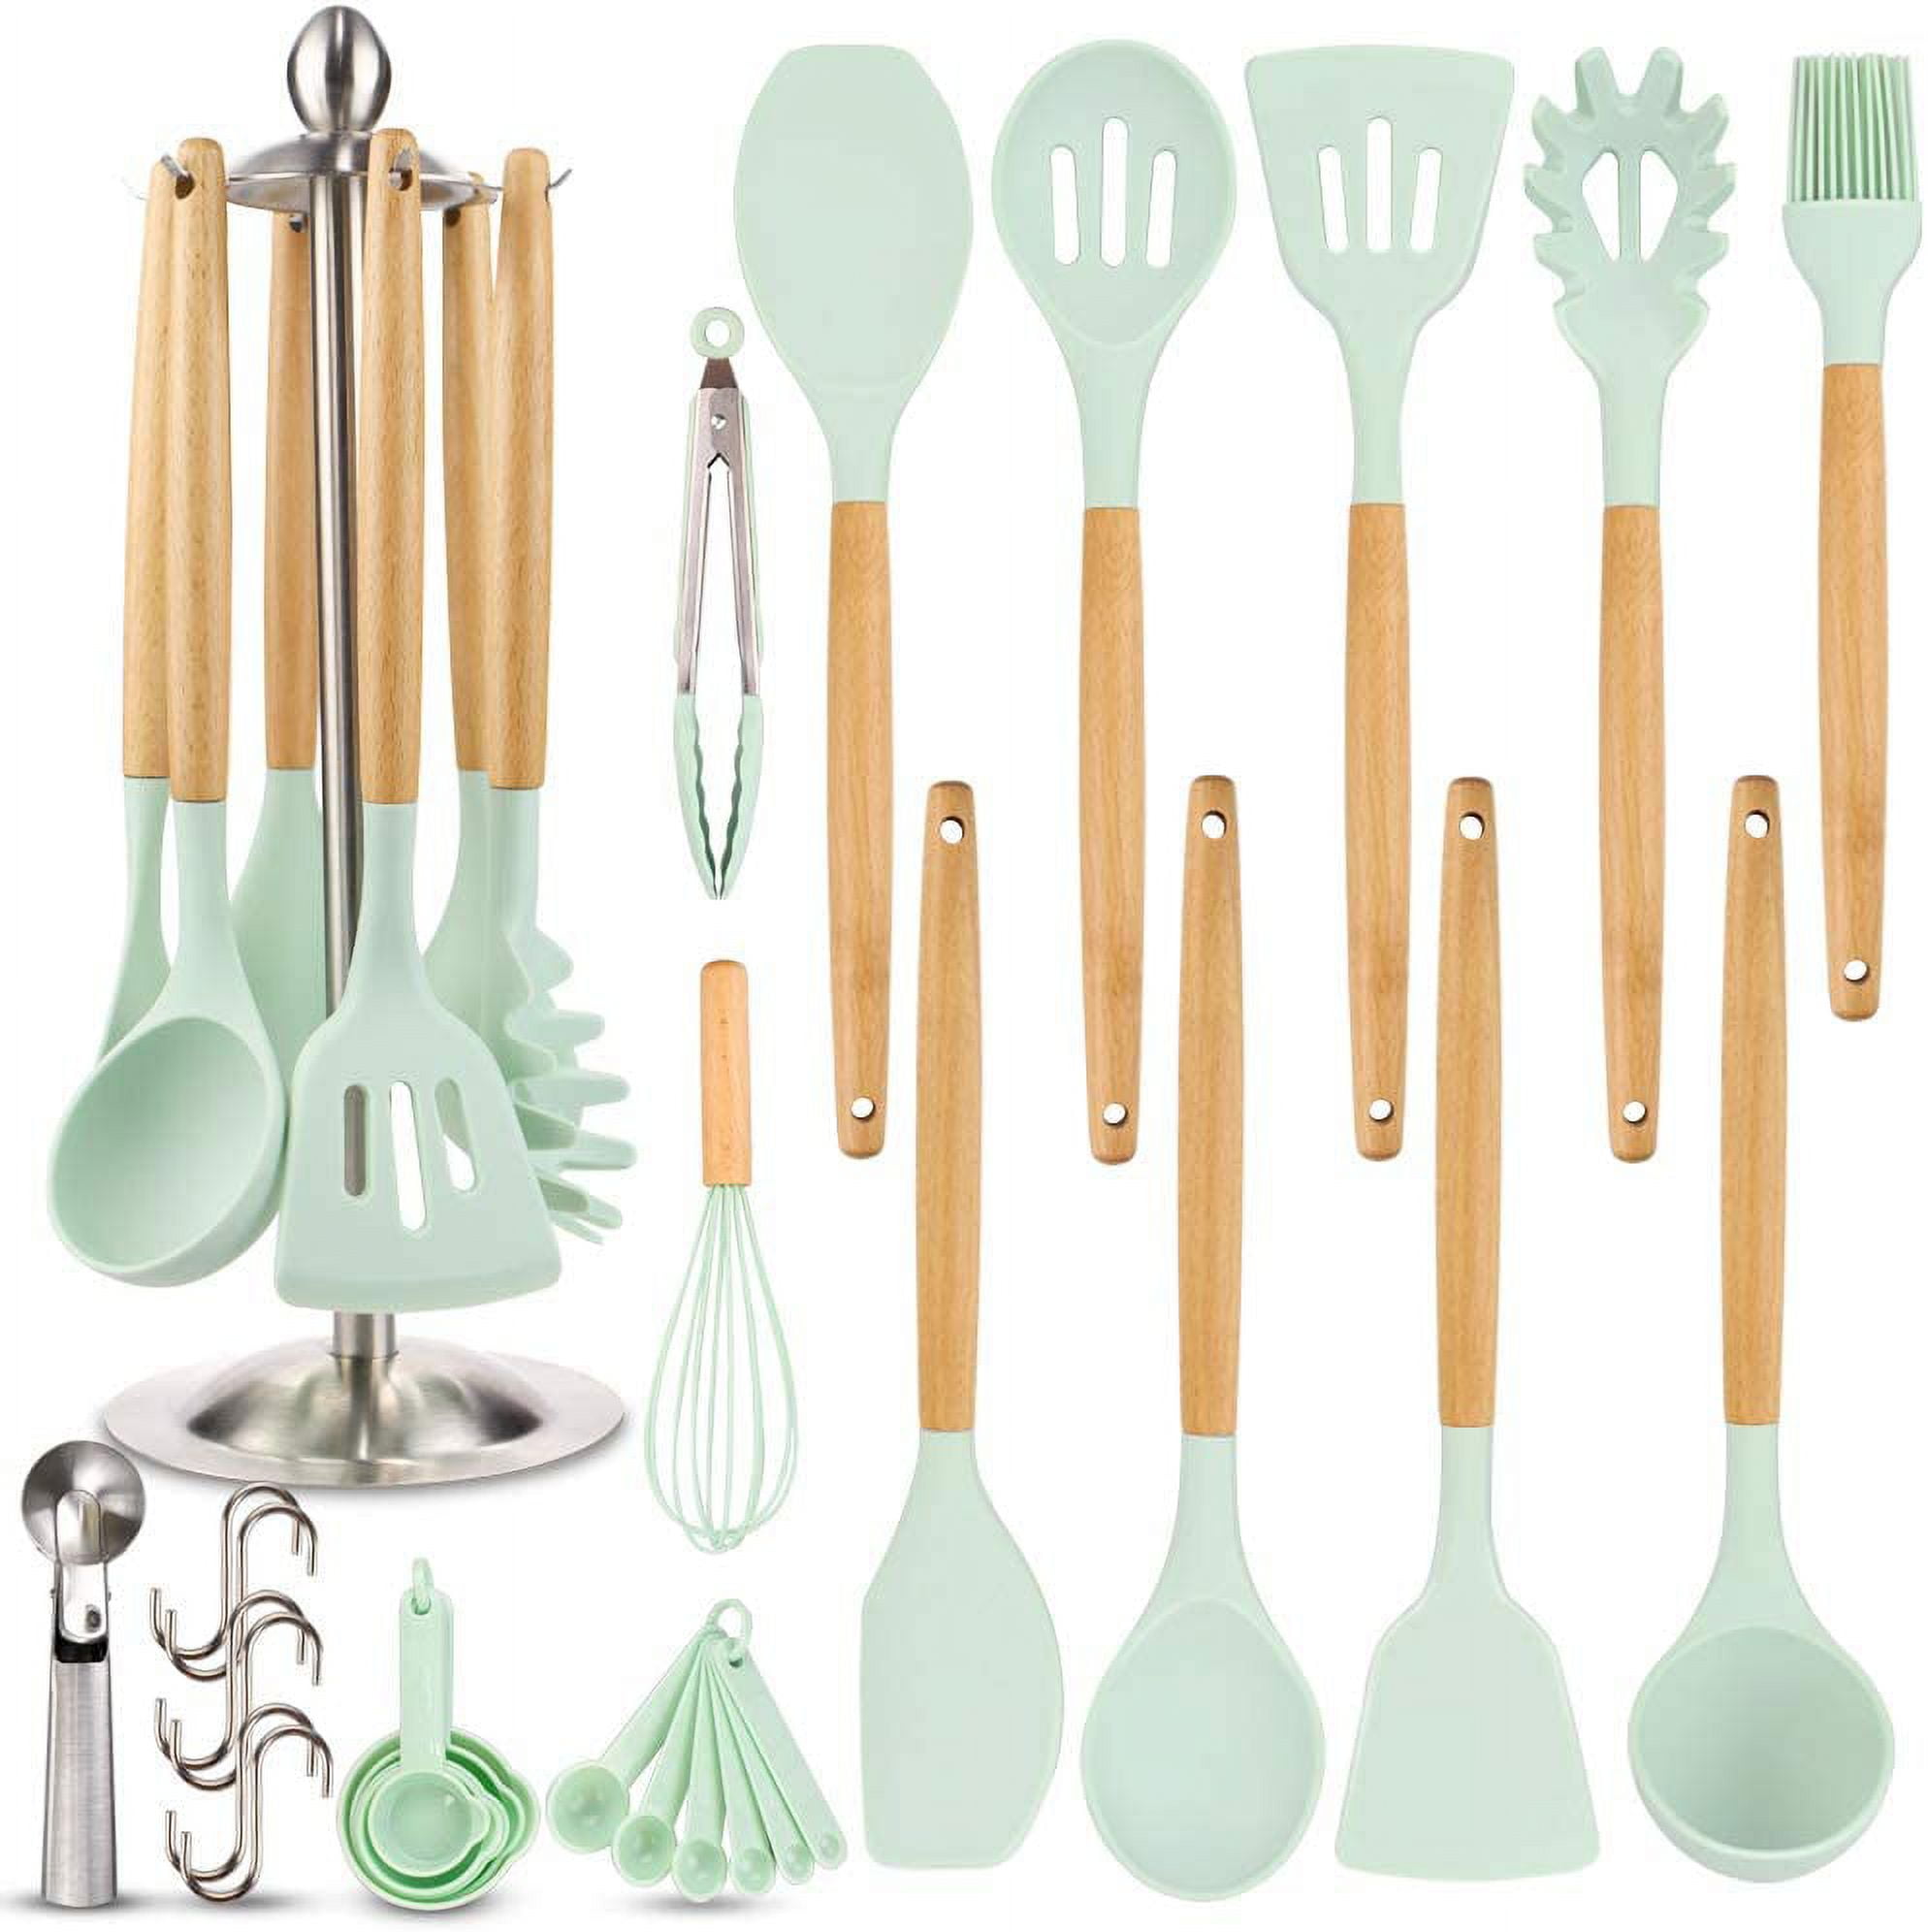 Silicone Kitchen Cooking Utensil Set, EAGMAK 14PCS Stainless Steel Silicone  Kitchen Utensils Spatula Set with Stand for Nonstick Cookware, BPA Free